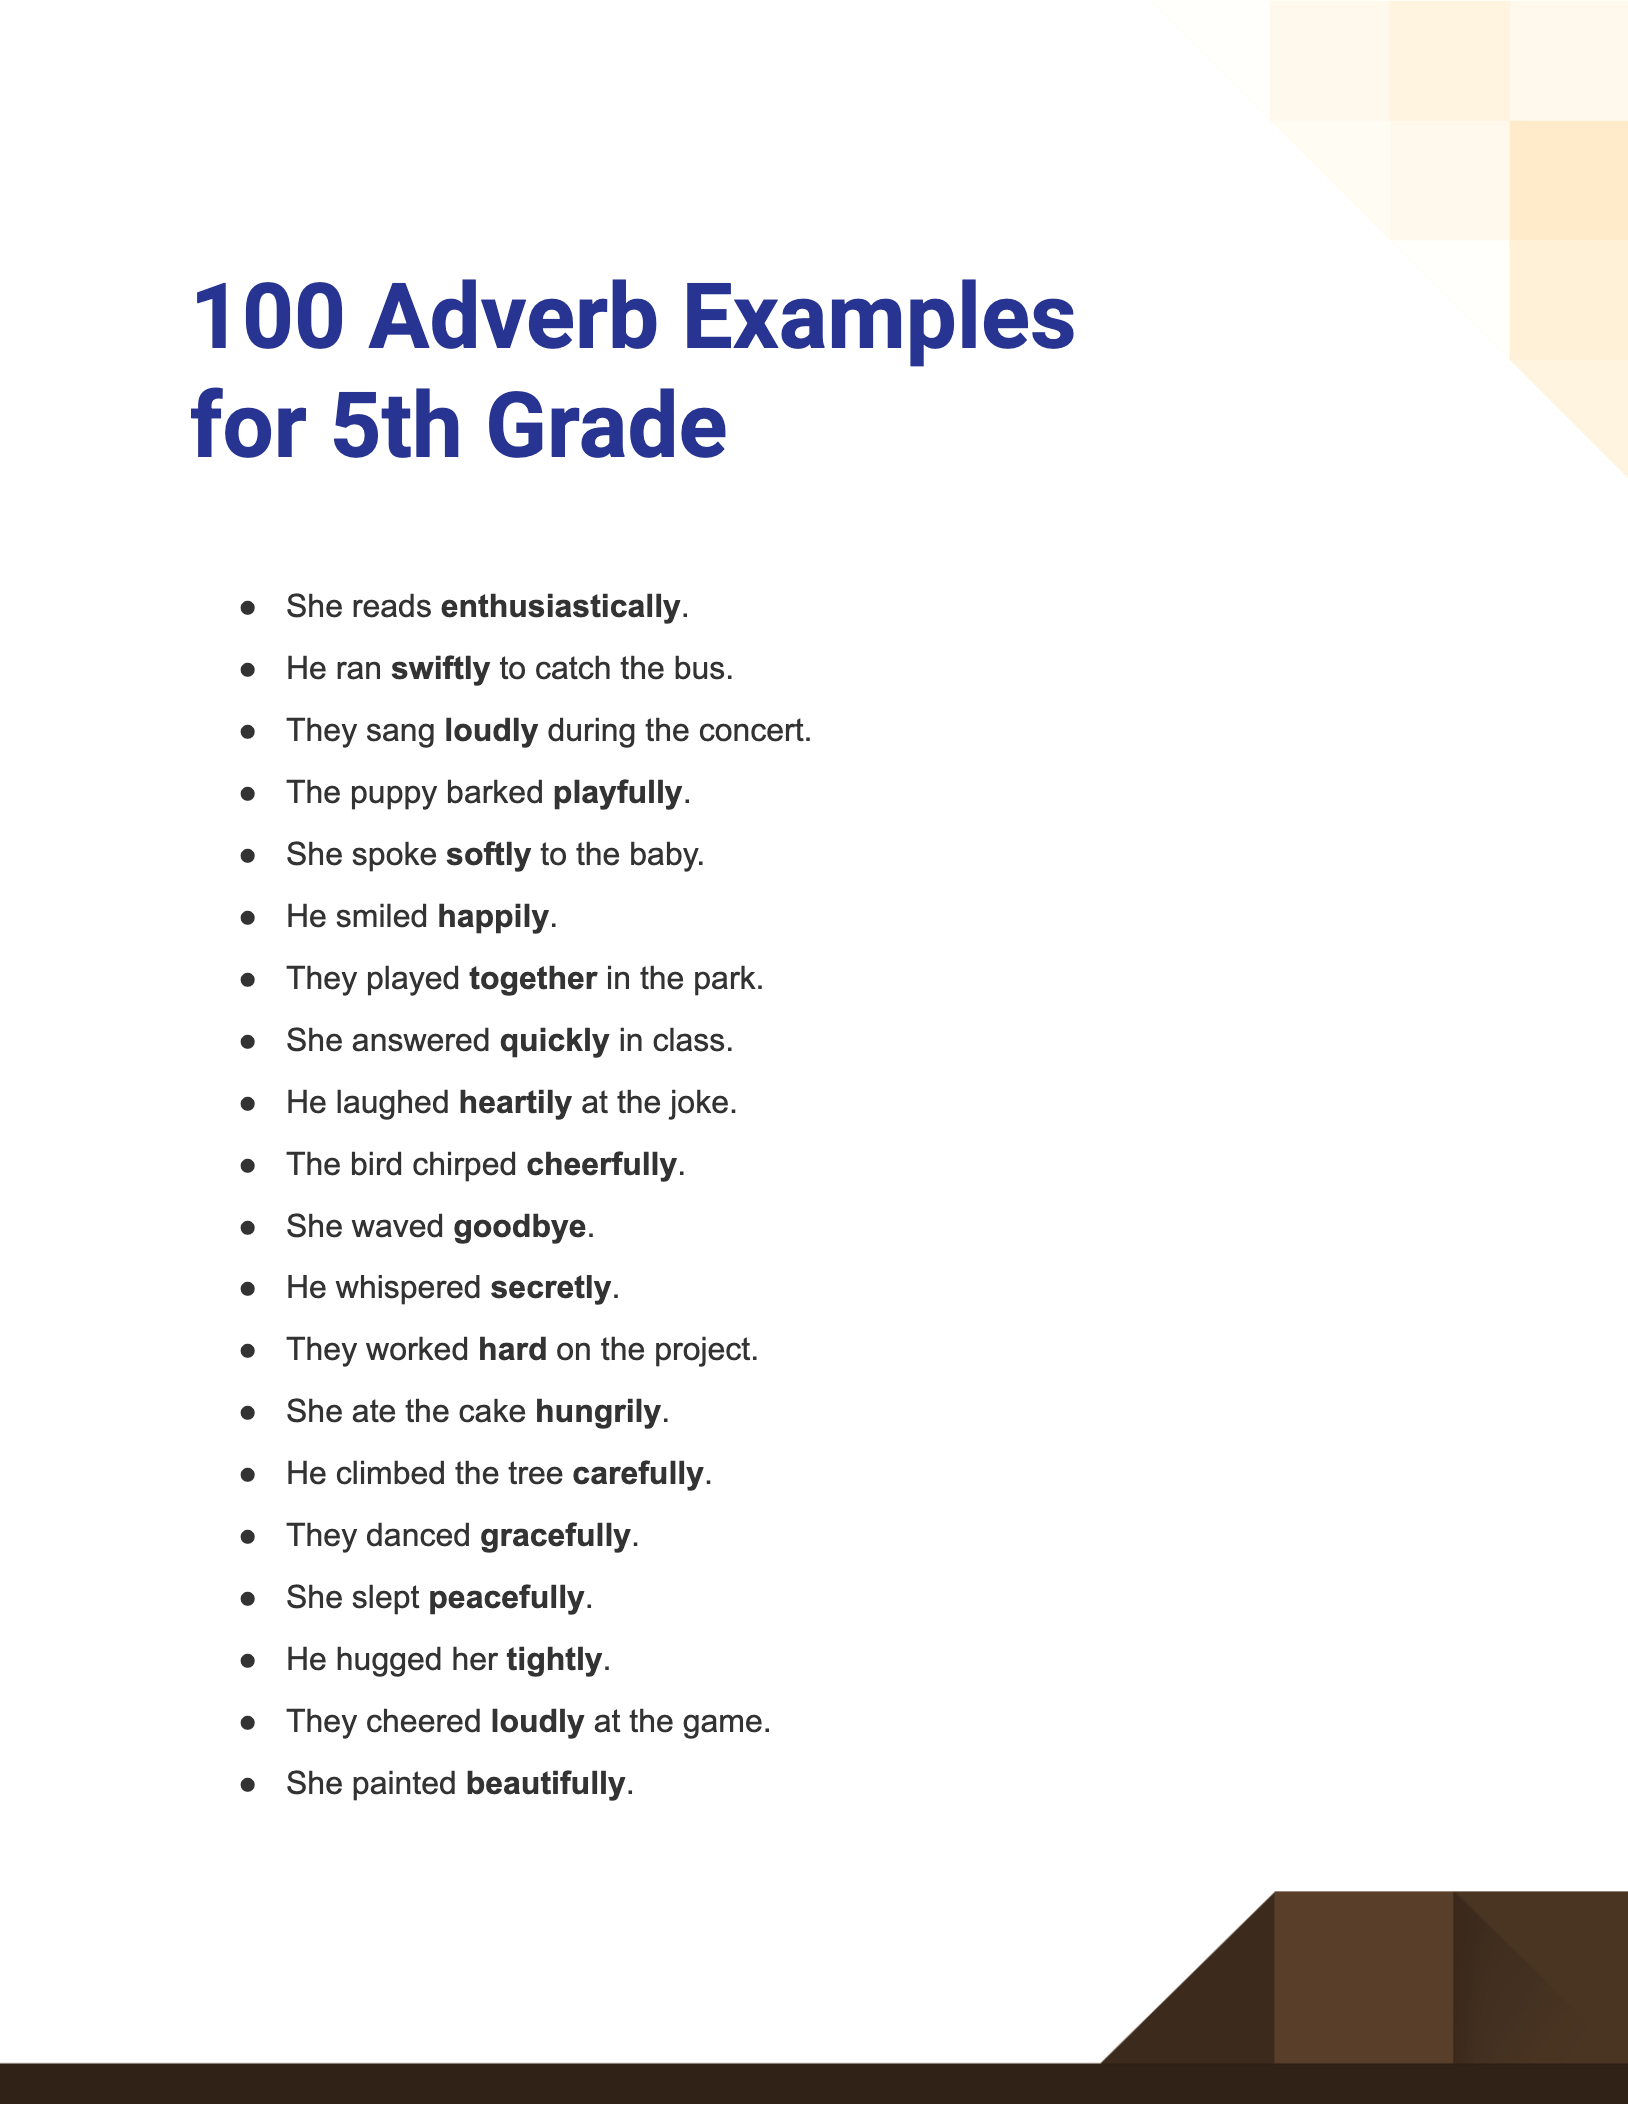 adverb examples for 5th grade1